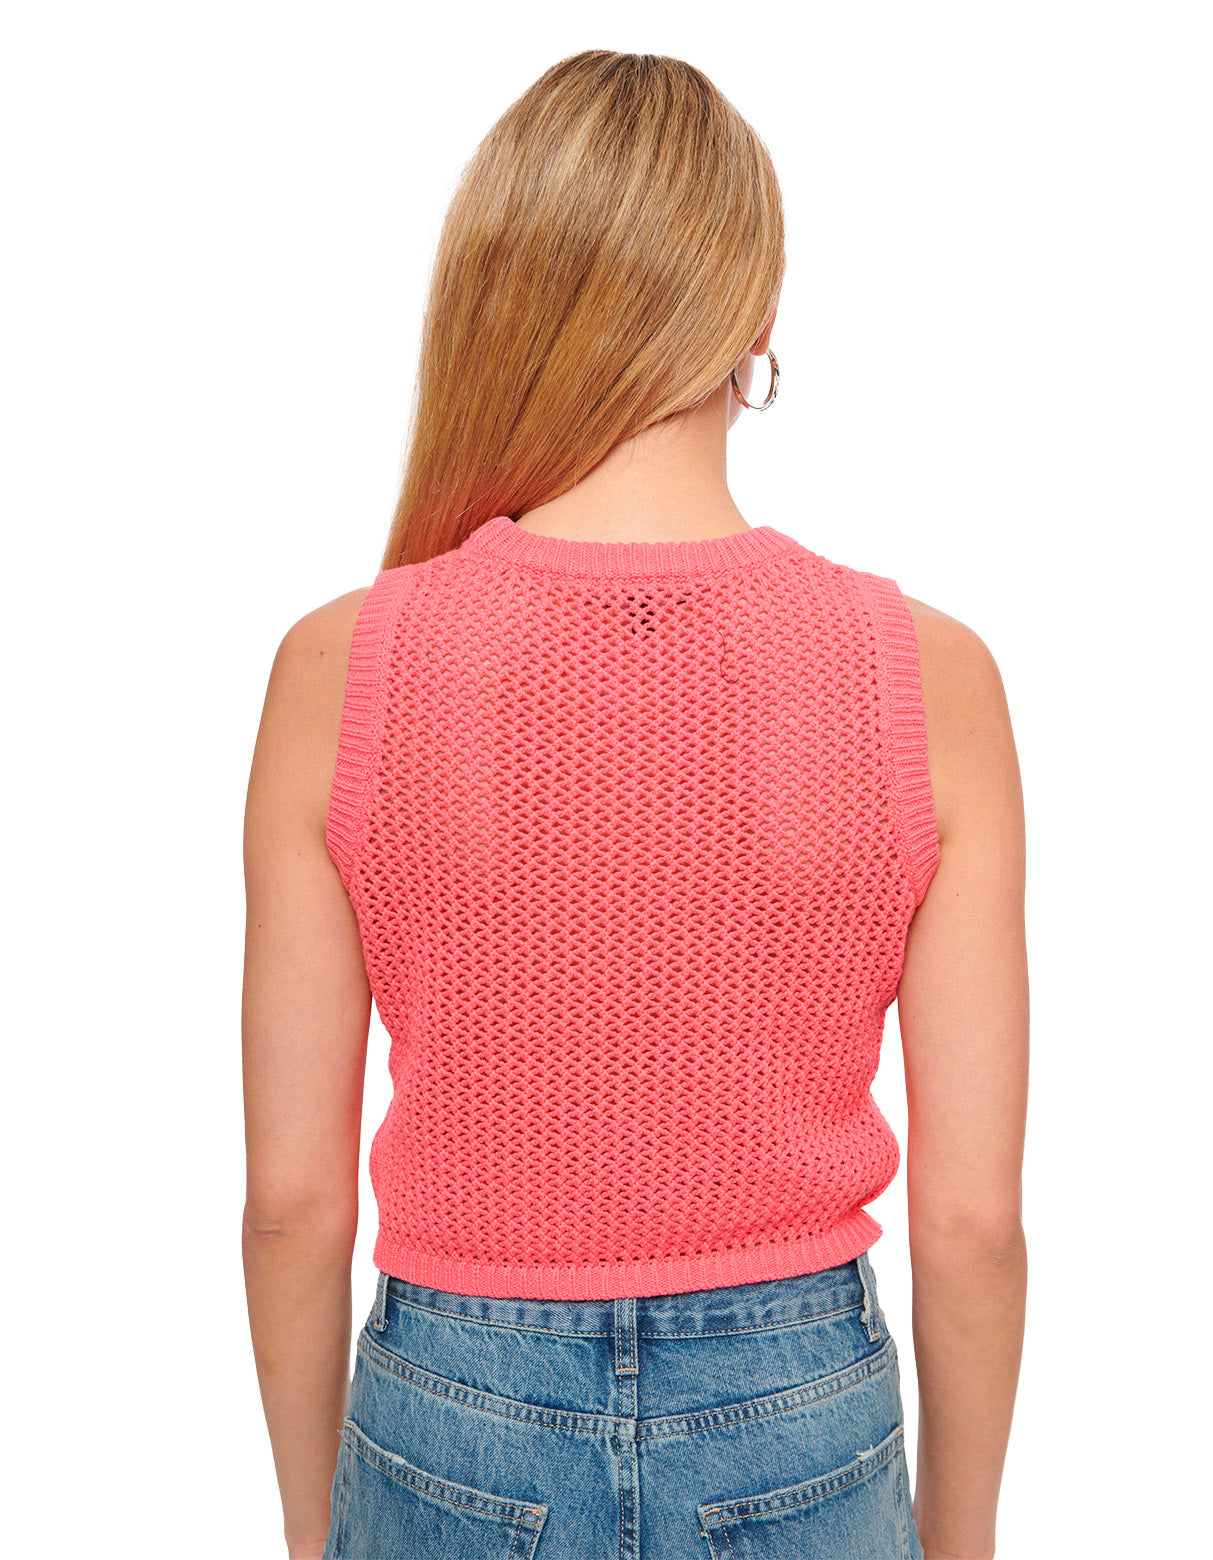 hot pink crochet top sweater summer outfit tops to pair with jeans